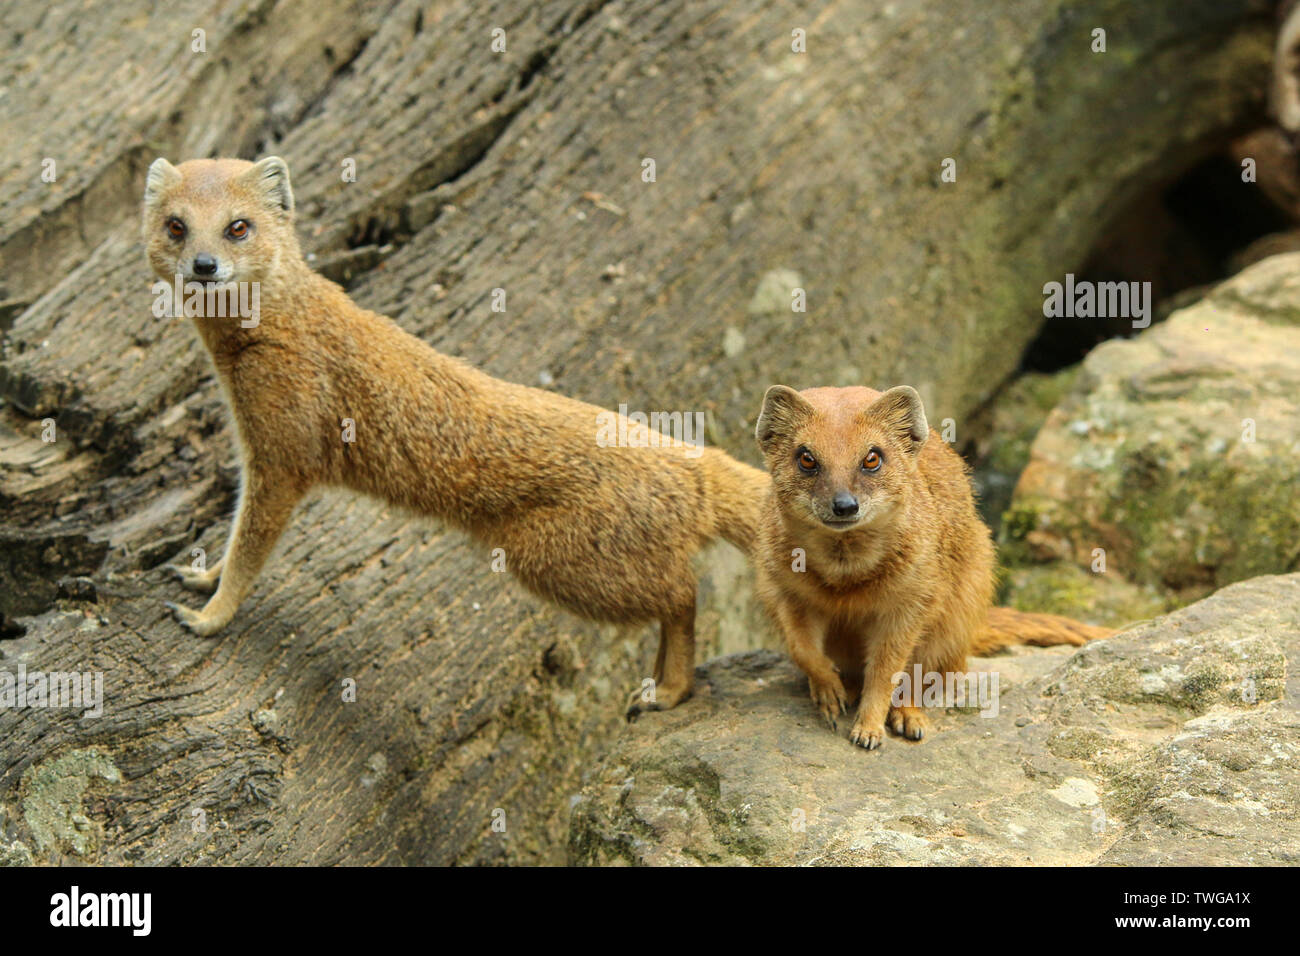 The portrait of two cute mongooses in the zoological garden. Stock Photo